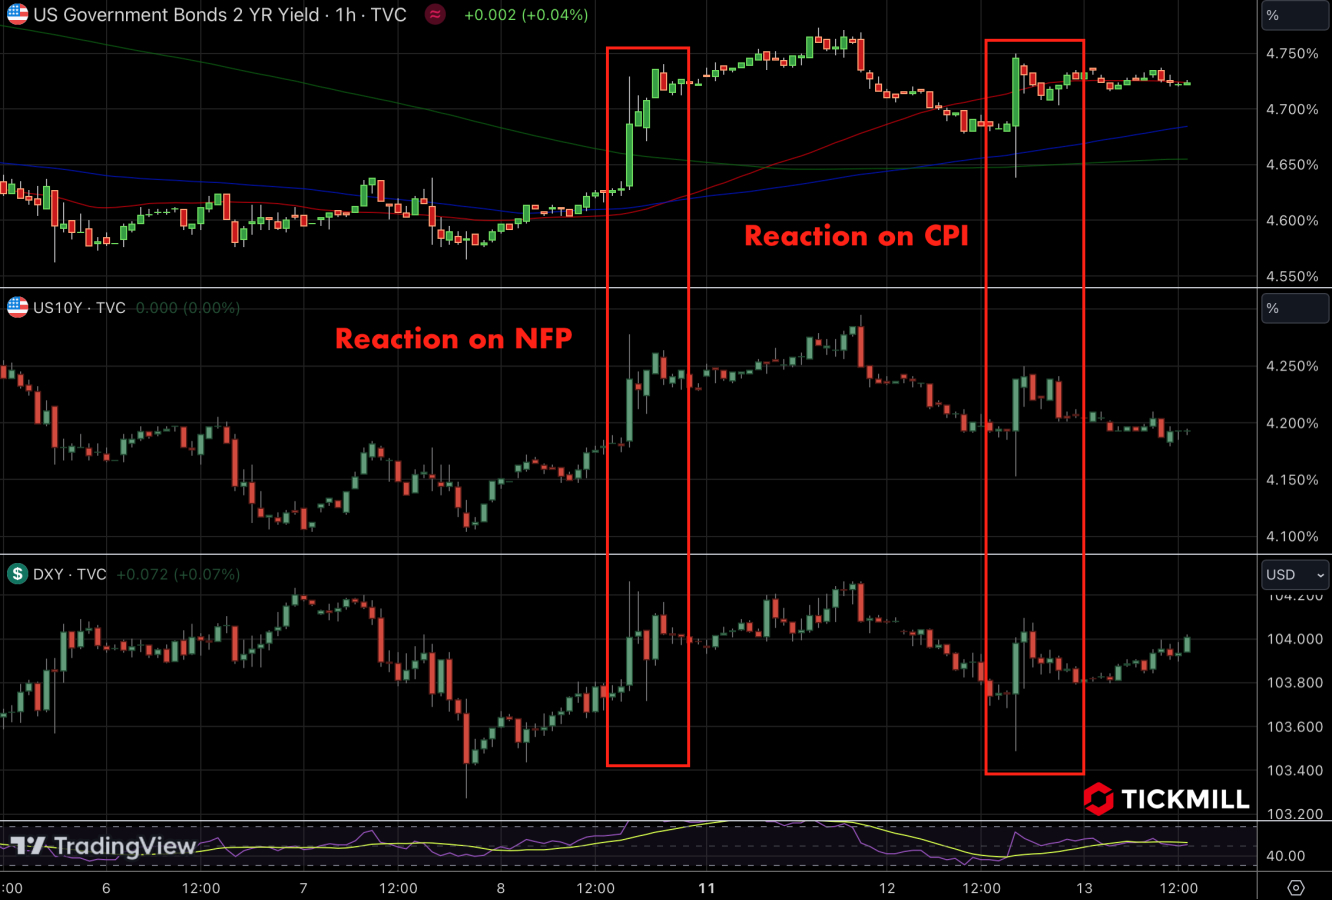 NFP&CPI reactions